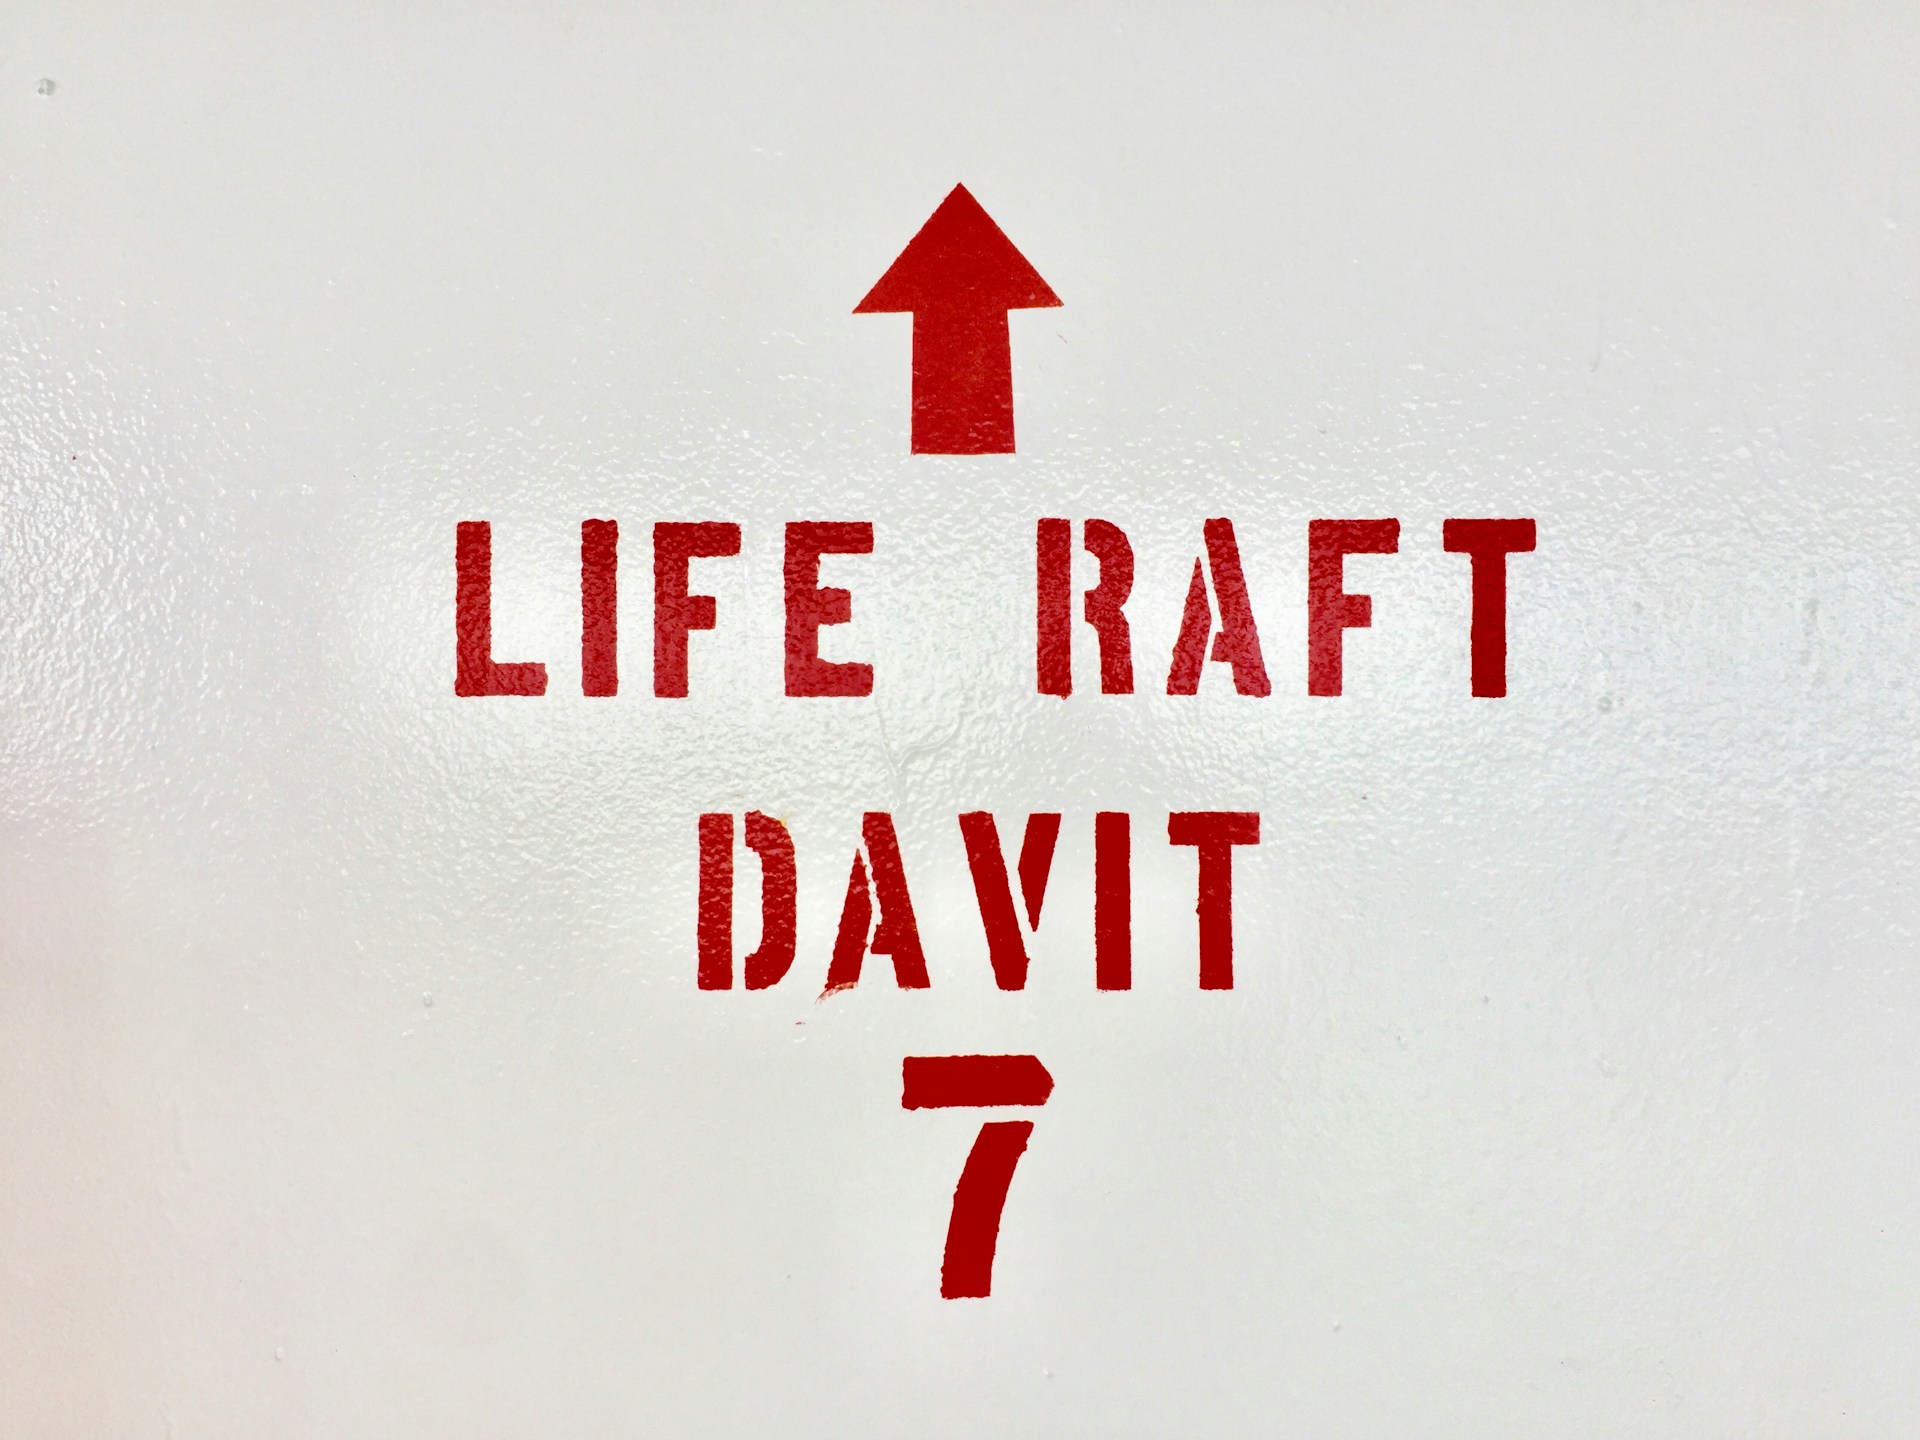 The words 'life raft' and 'davit' painted on a vessel